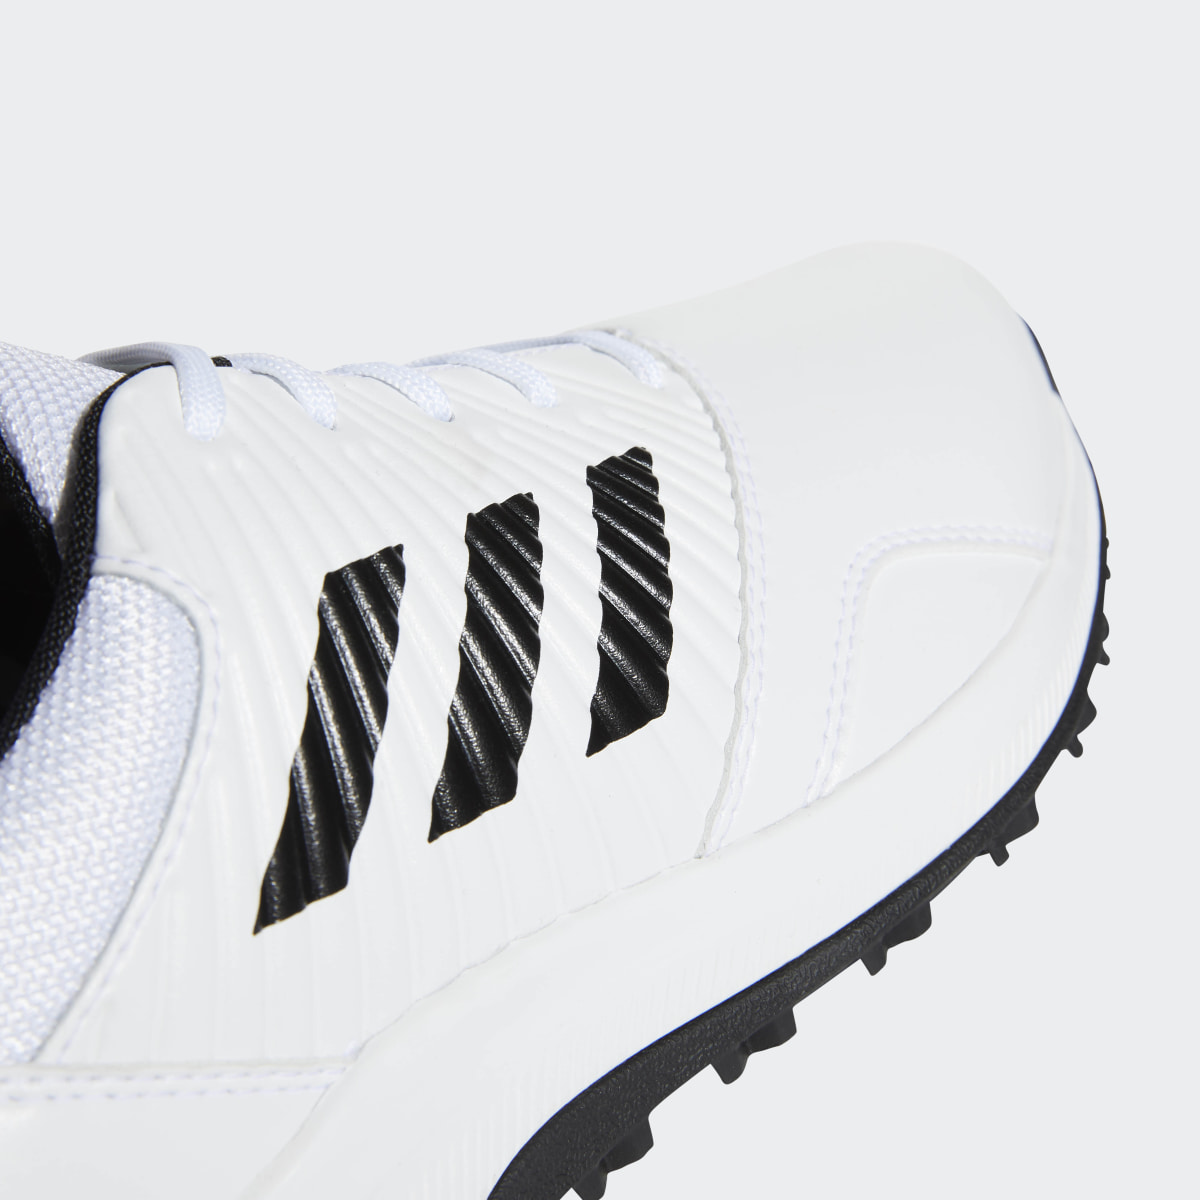 Adidas CP Traxion Spikeless Golf Shoes. 10